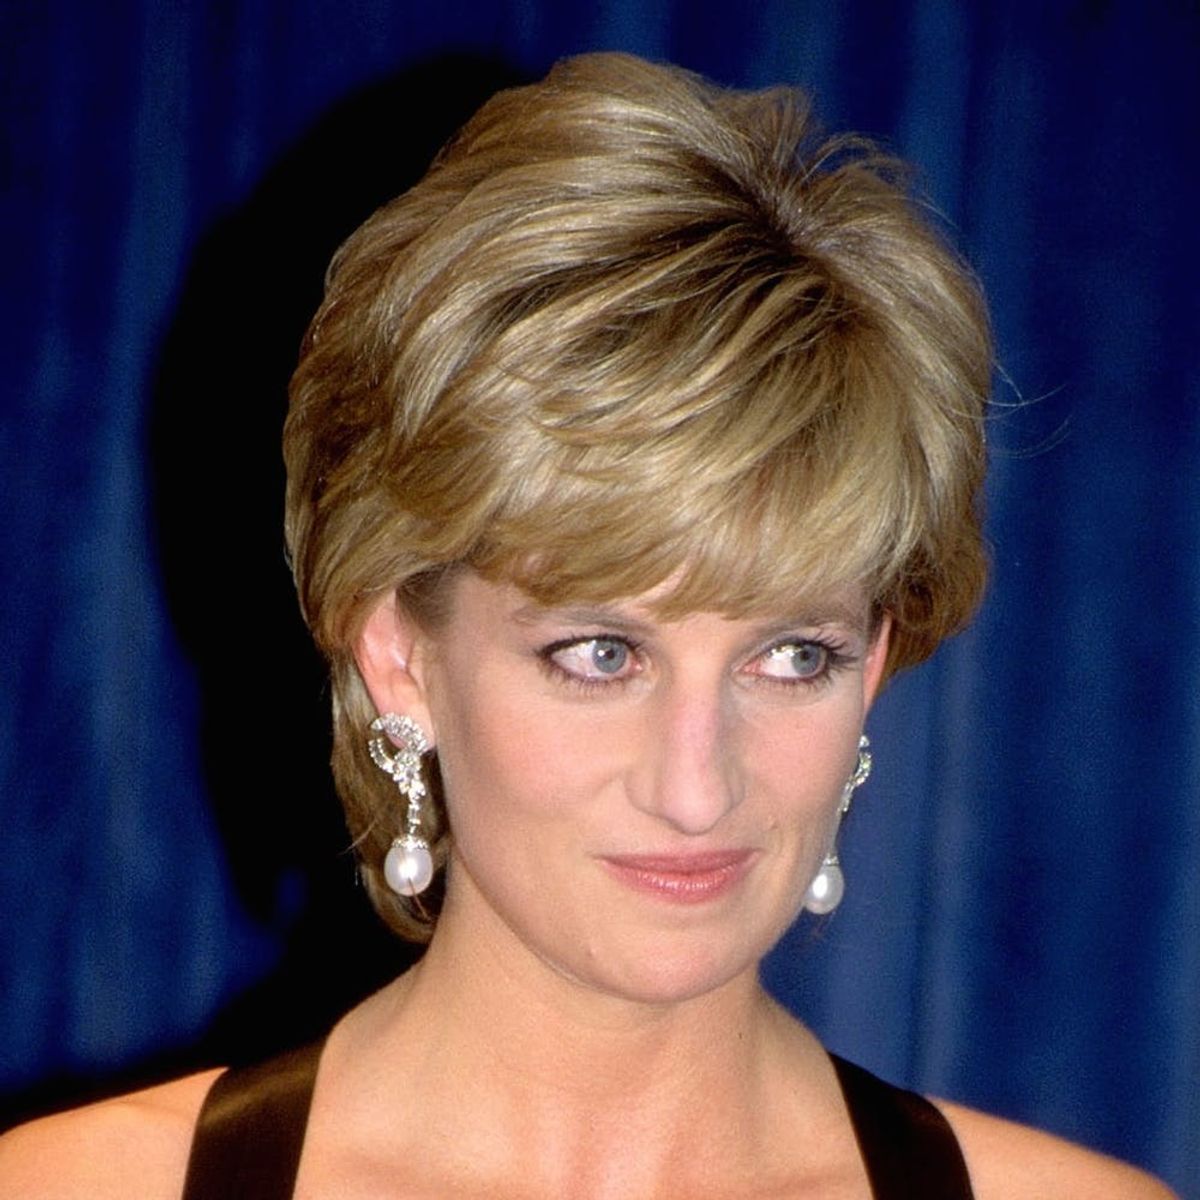 The BBC Is Filming a New Fictional Drama About Princess Diana